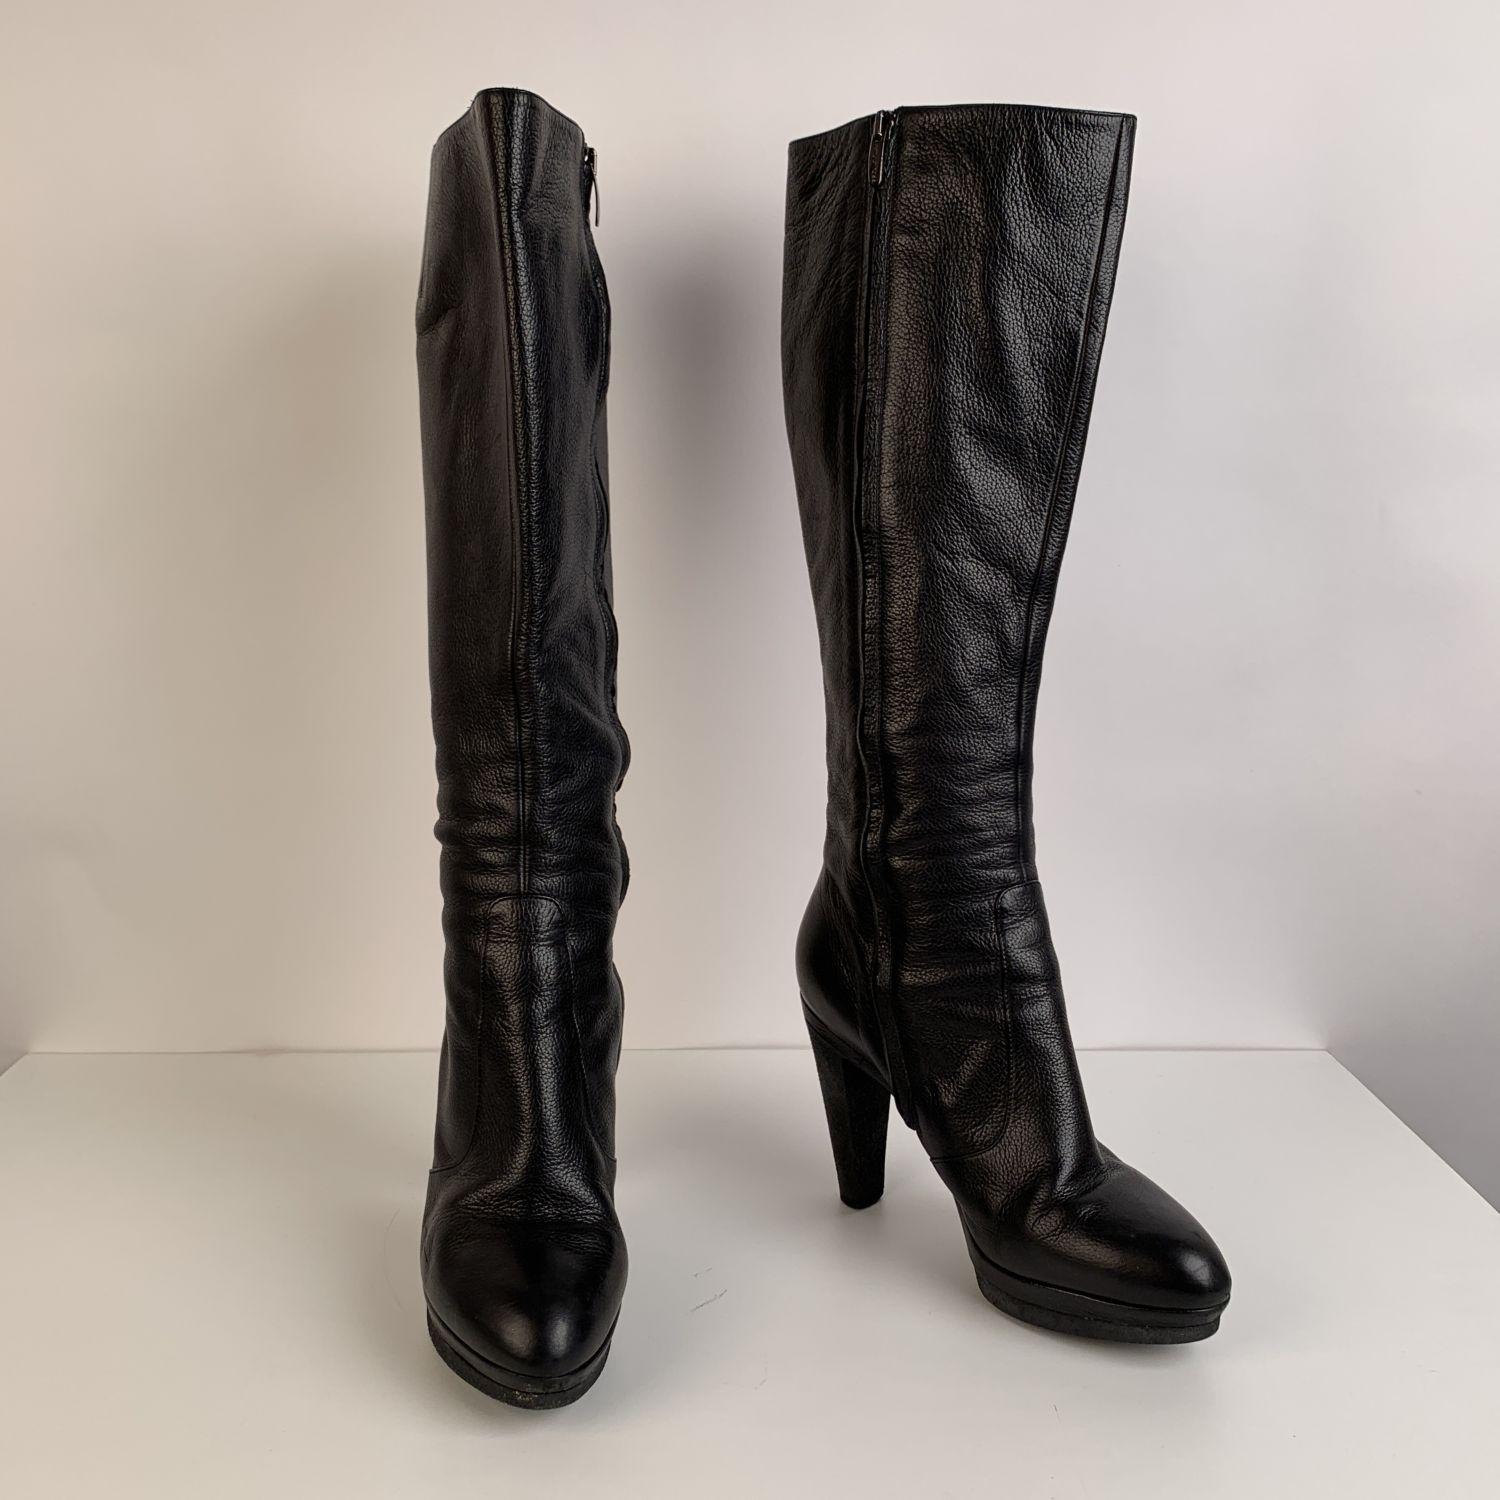 Sergio Rossi Black Leather Heeled Boots Shoes Size 38.5 In Excellent Condition In Rome, Rome